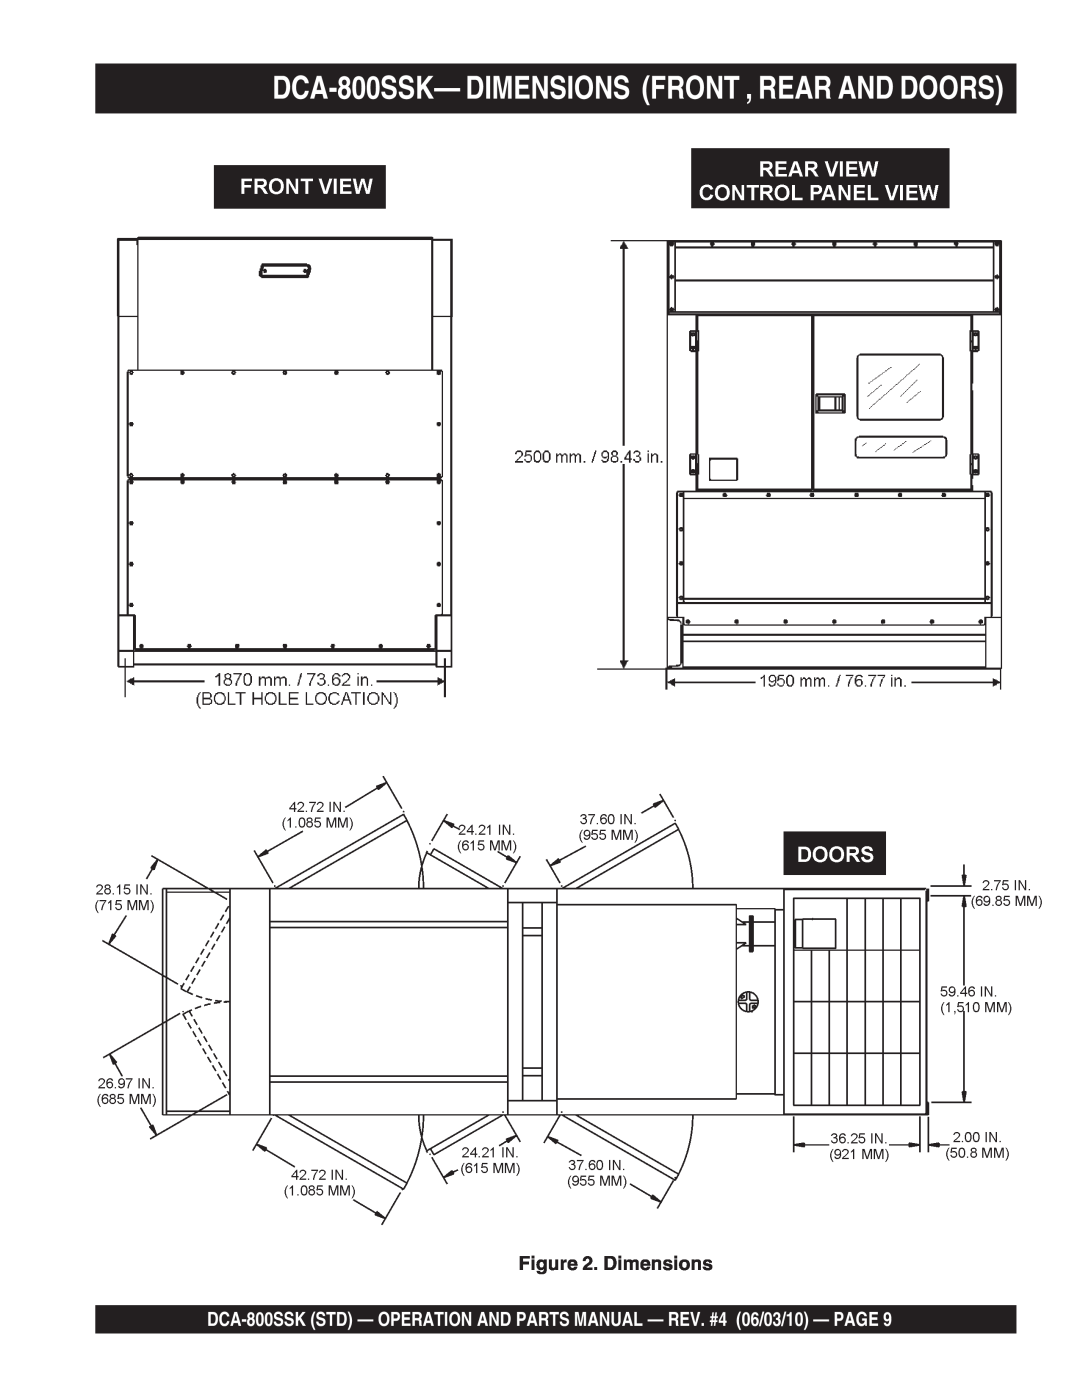 Multiquip operation manual DCA-800SSK- DIMENSIONS FRONT , REAR AND DOORS, Dimensions 